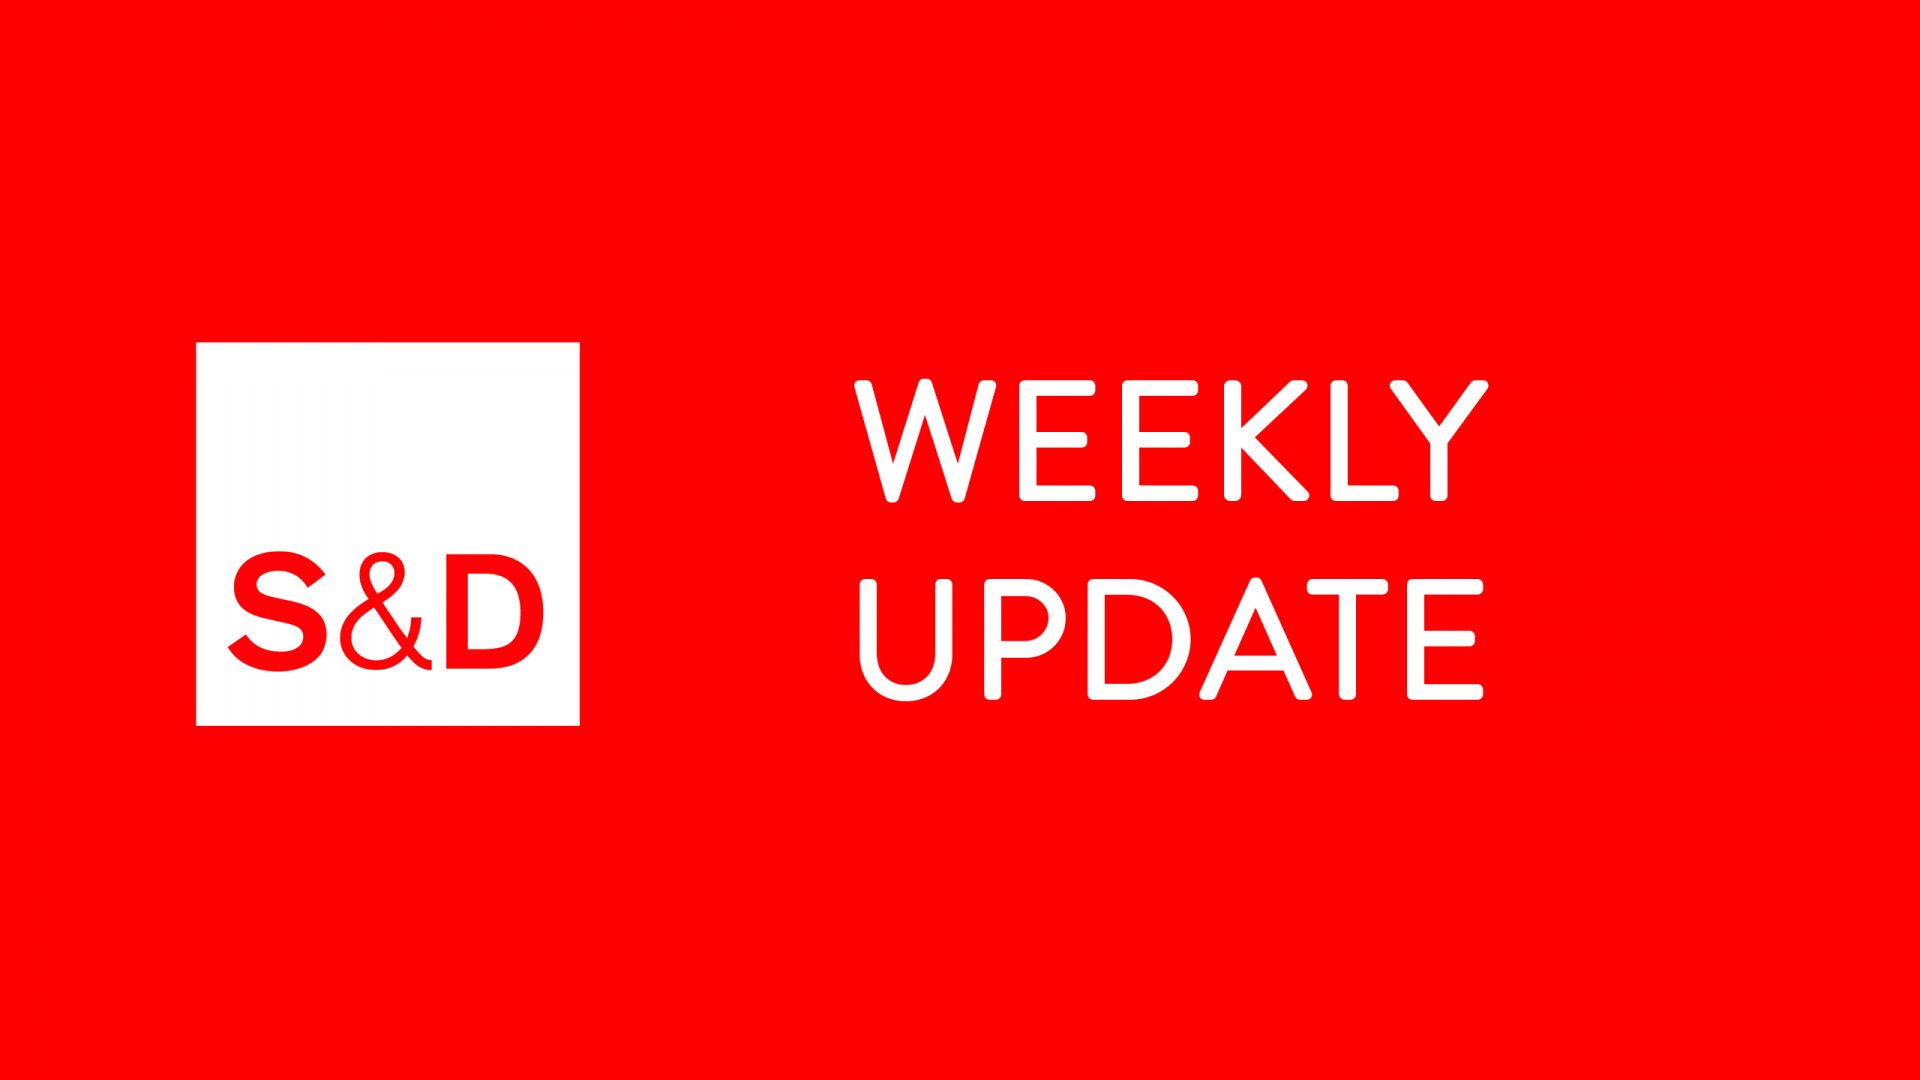 S&Ds Times - Weekly Update. This Week's Highlights and What's Coming Up 